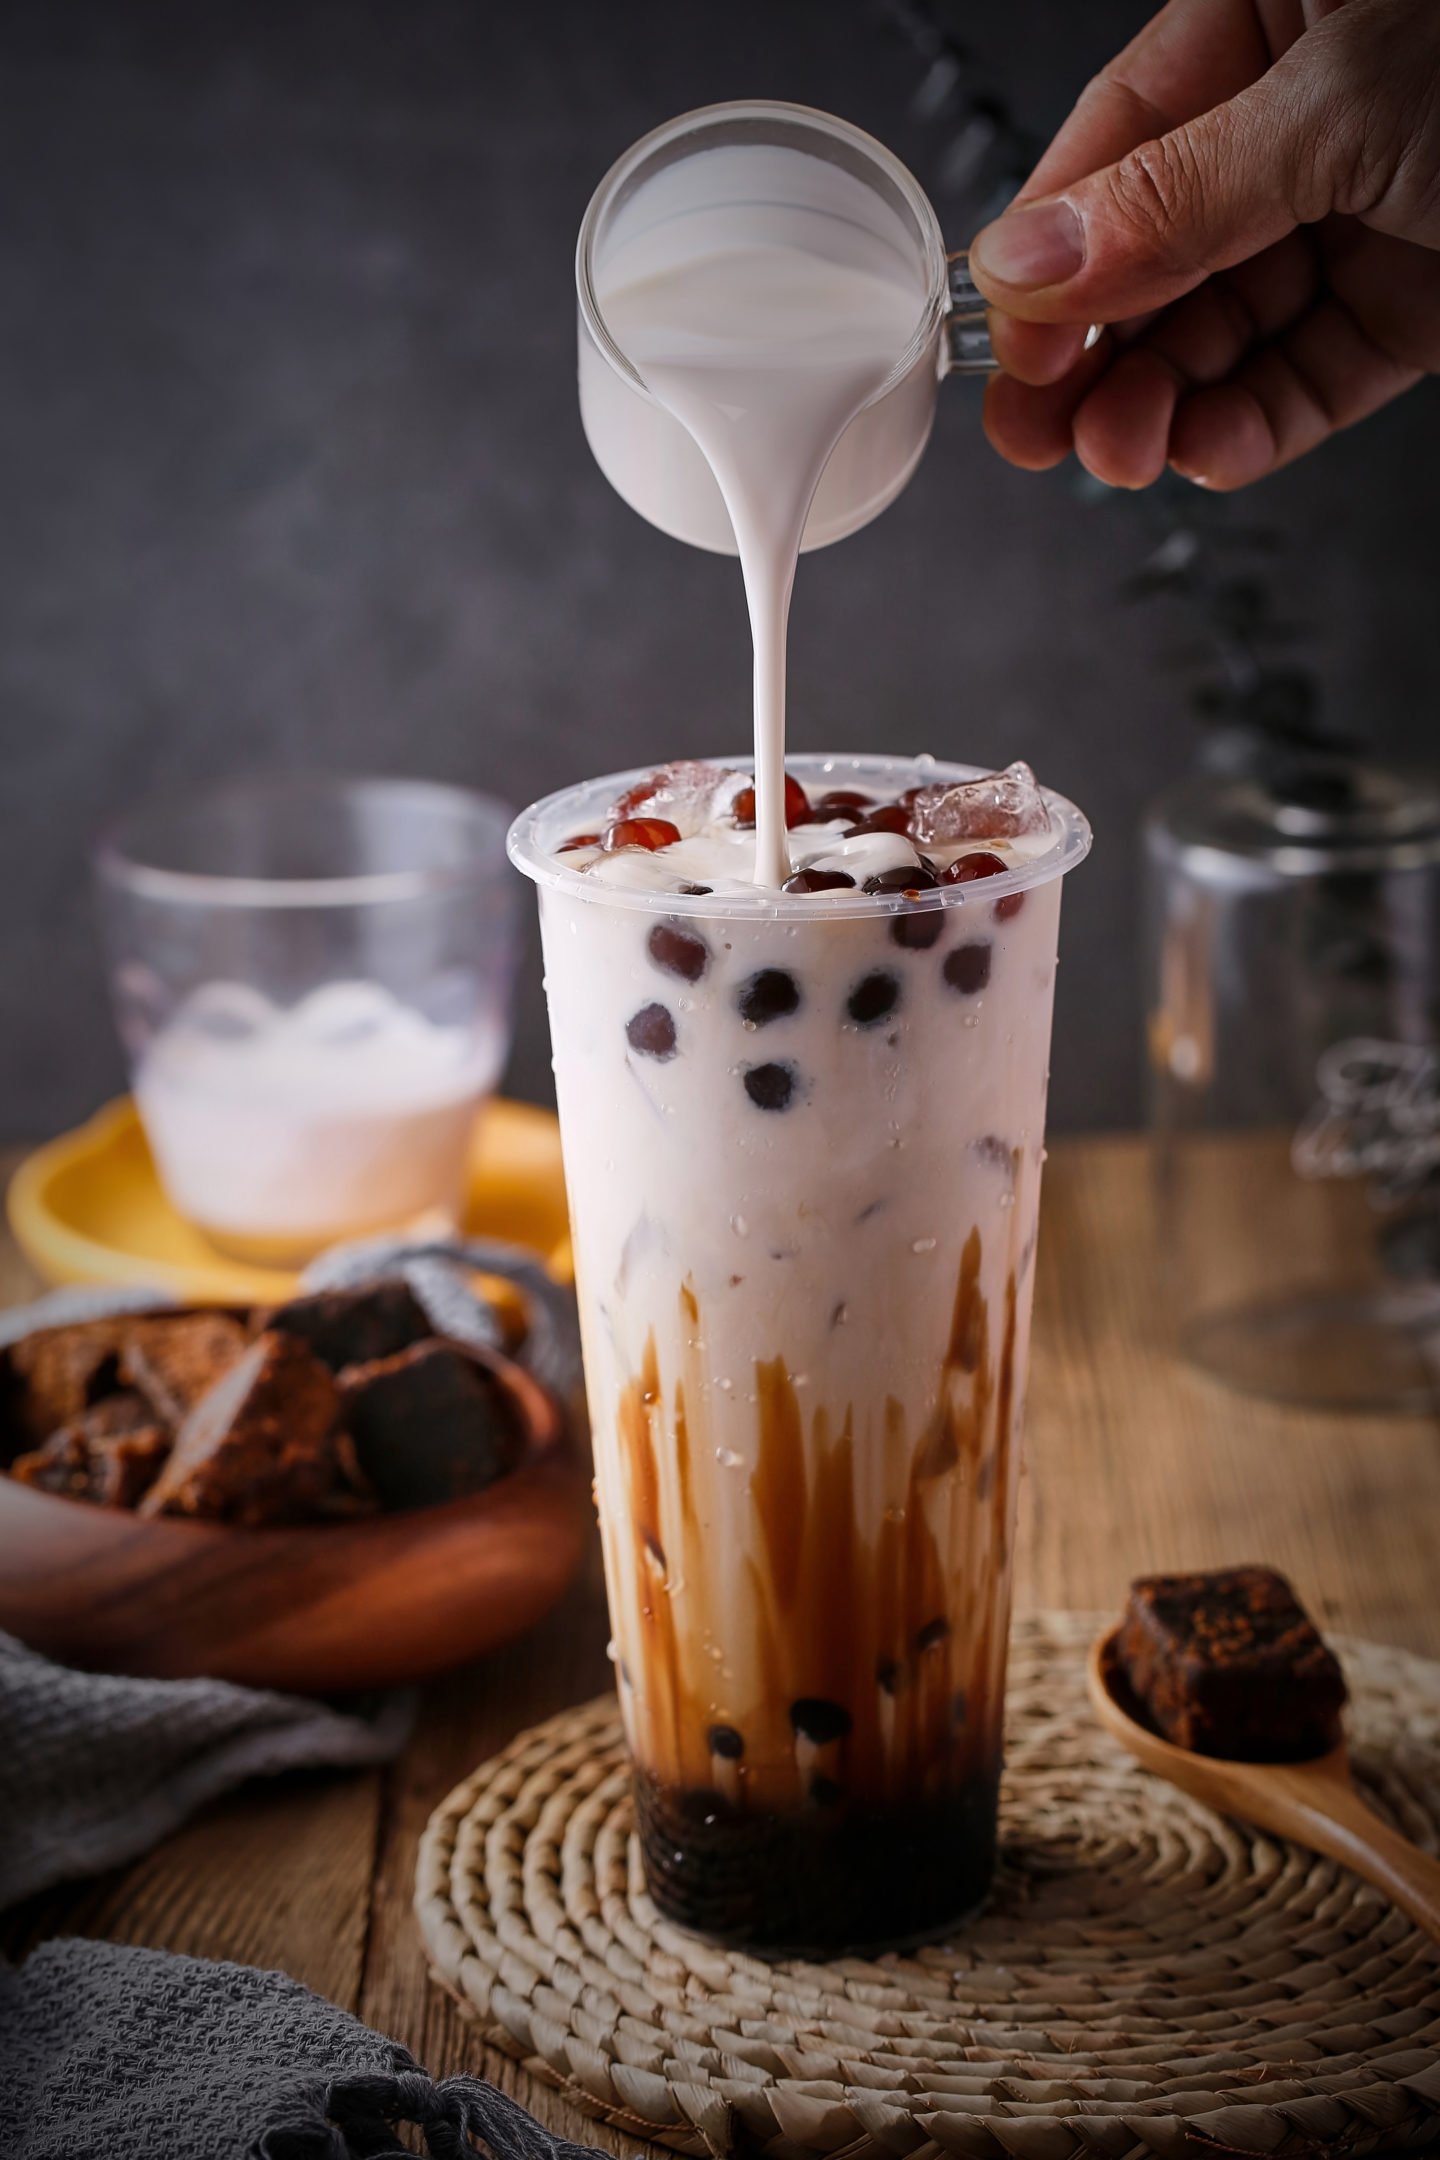 Pouring Milk Into Glass Of Black Tea And Boba